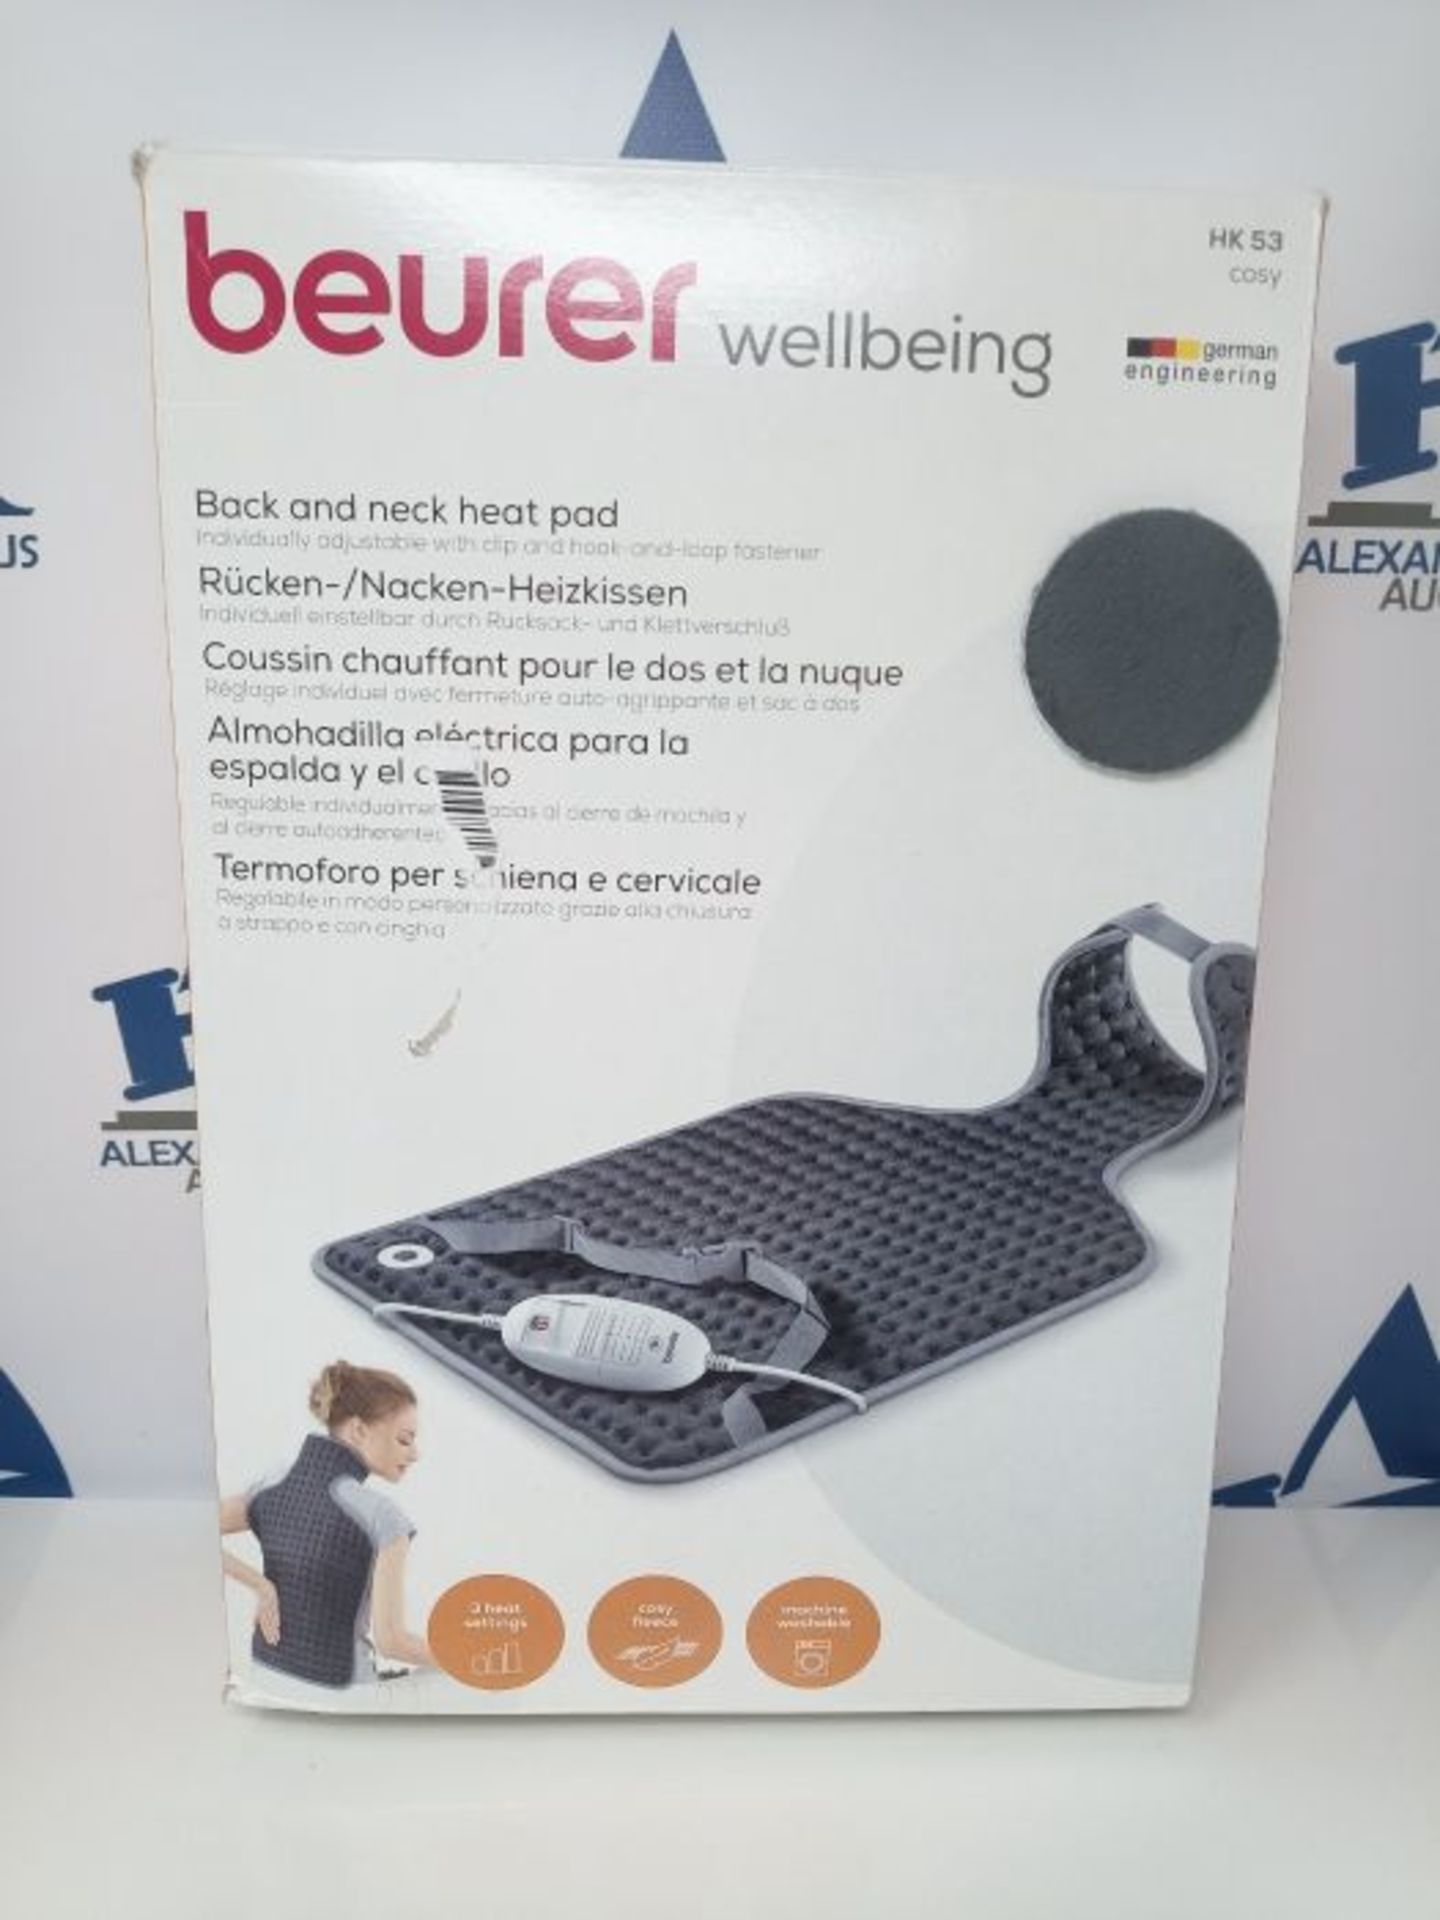 Beurer - HK53 - Heating Pad for Back and Neck - 3 Years Warranty - Image 2 of 3